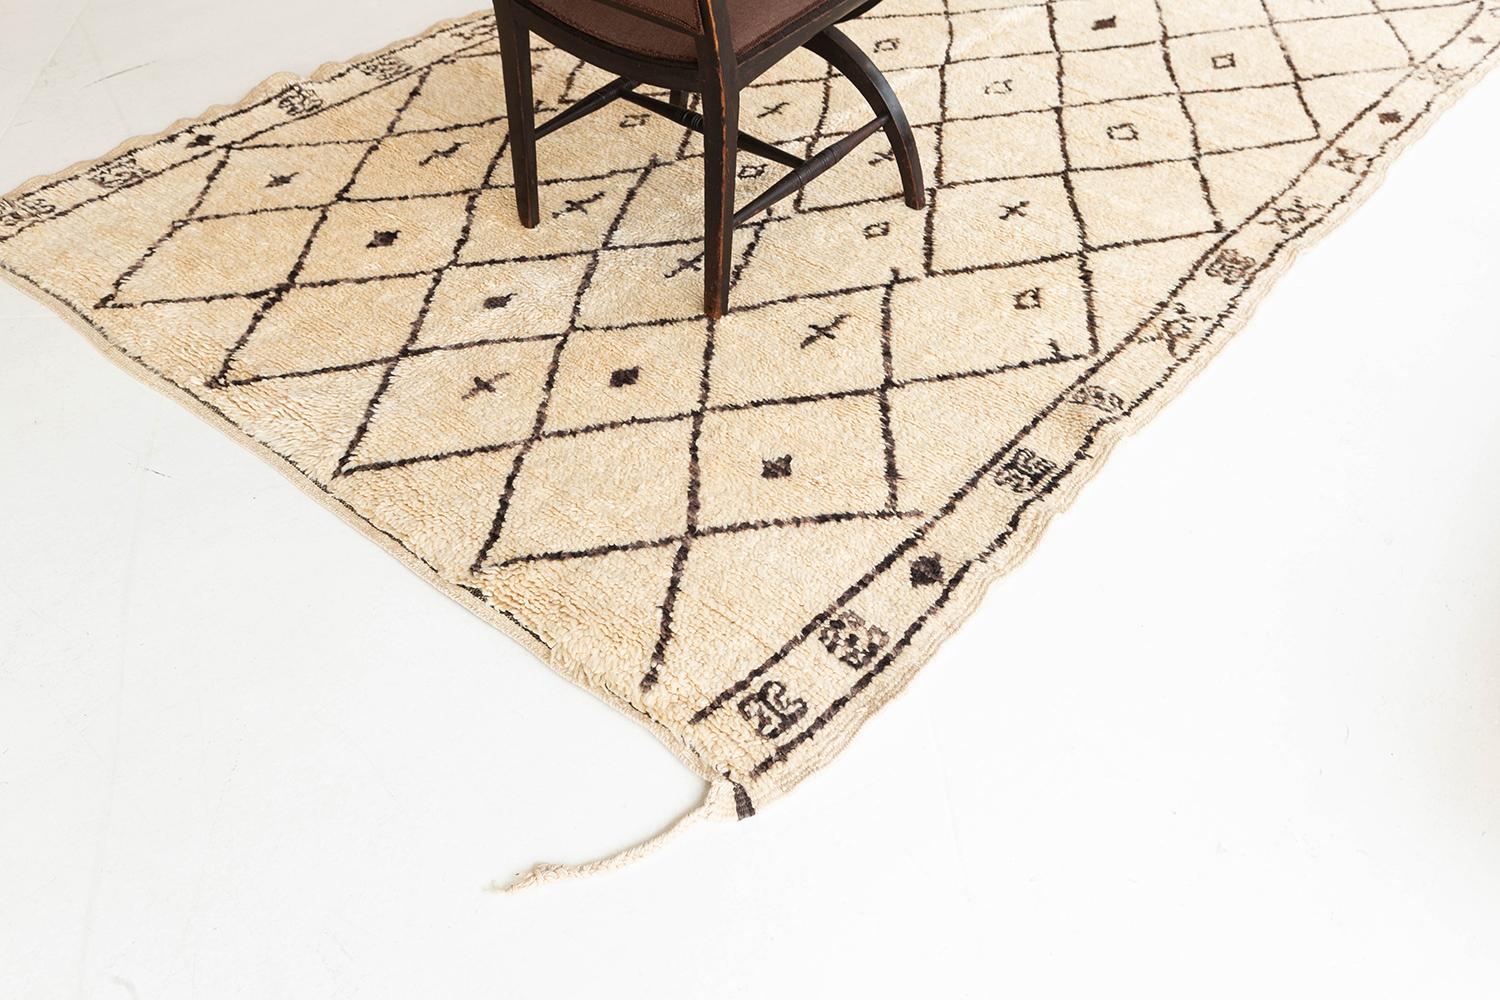 A beautiful antique Moroccan rug made by the Beni Ourain Tribe. This unique handwoven rug contains traditional diamond line-work with symbolic motifs throughout including the rug's borders. Beni Ourain tribal rugs are known for their soft black or